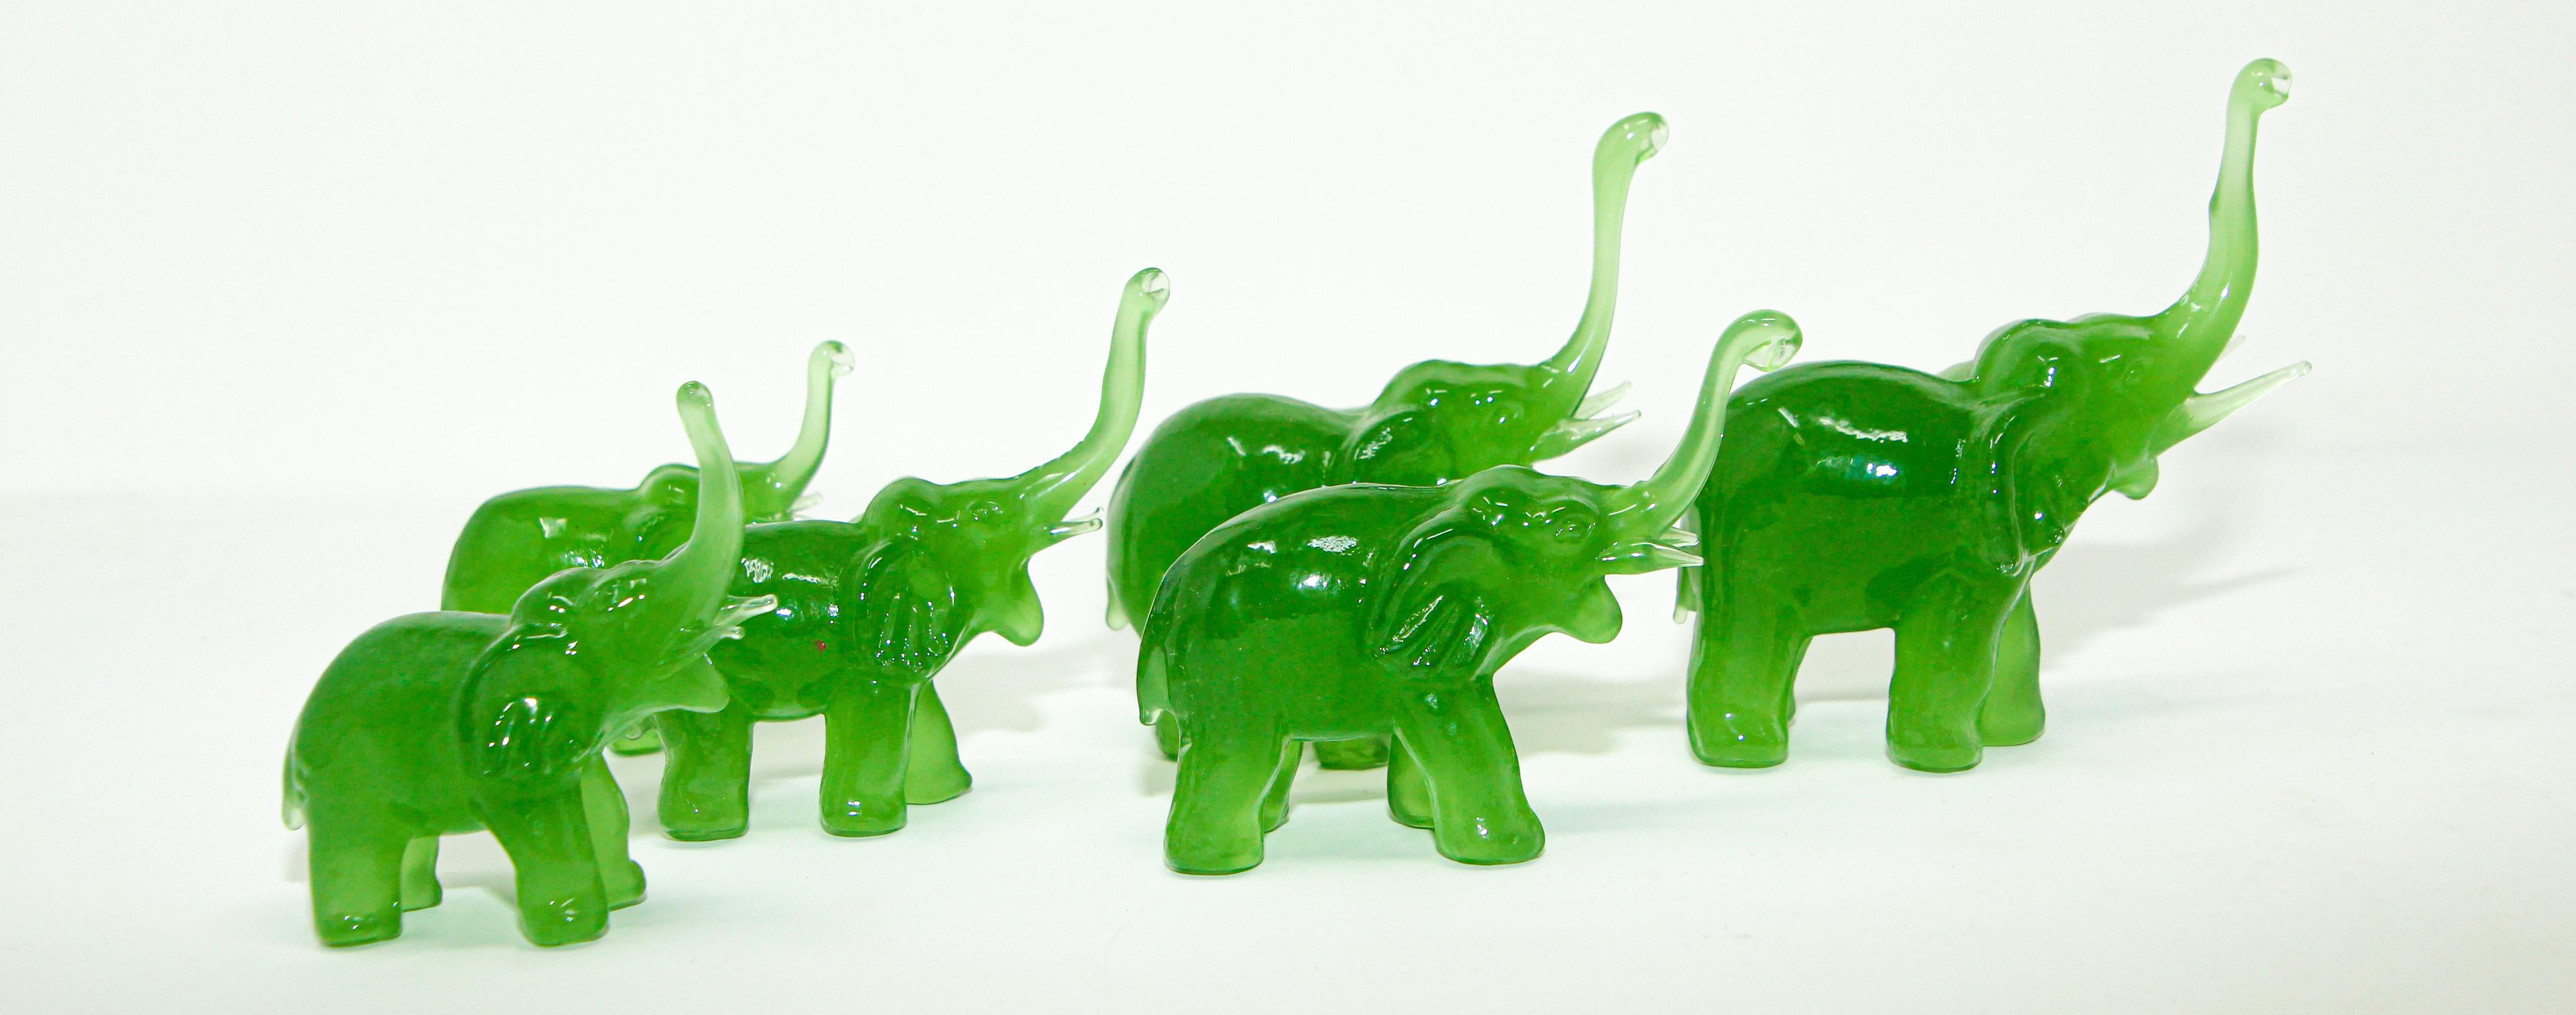 Vintage handcrafted jade green color glass elephants group sculptures.
Vintage elephant figurine made from translucent, mint green, Peking glass in green emerald jade color.
Collectible Asian vintage sculpture set of 6 elephants family figurines